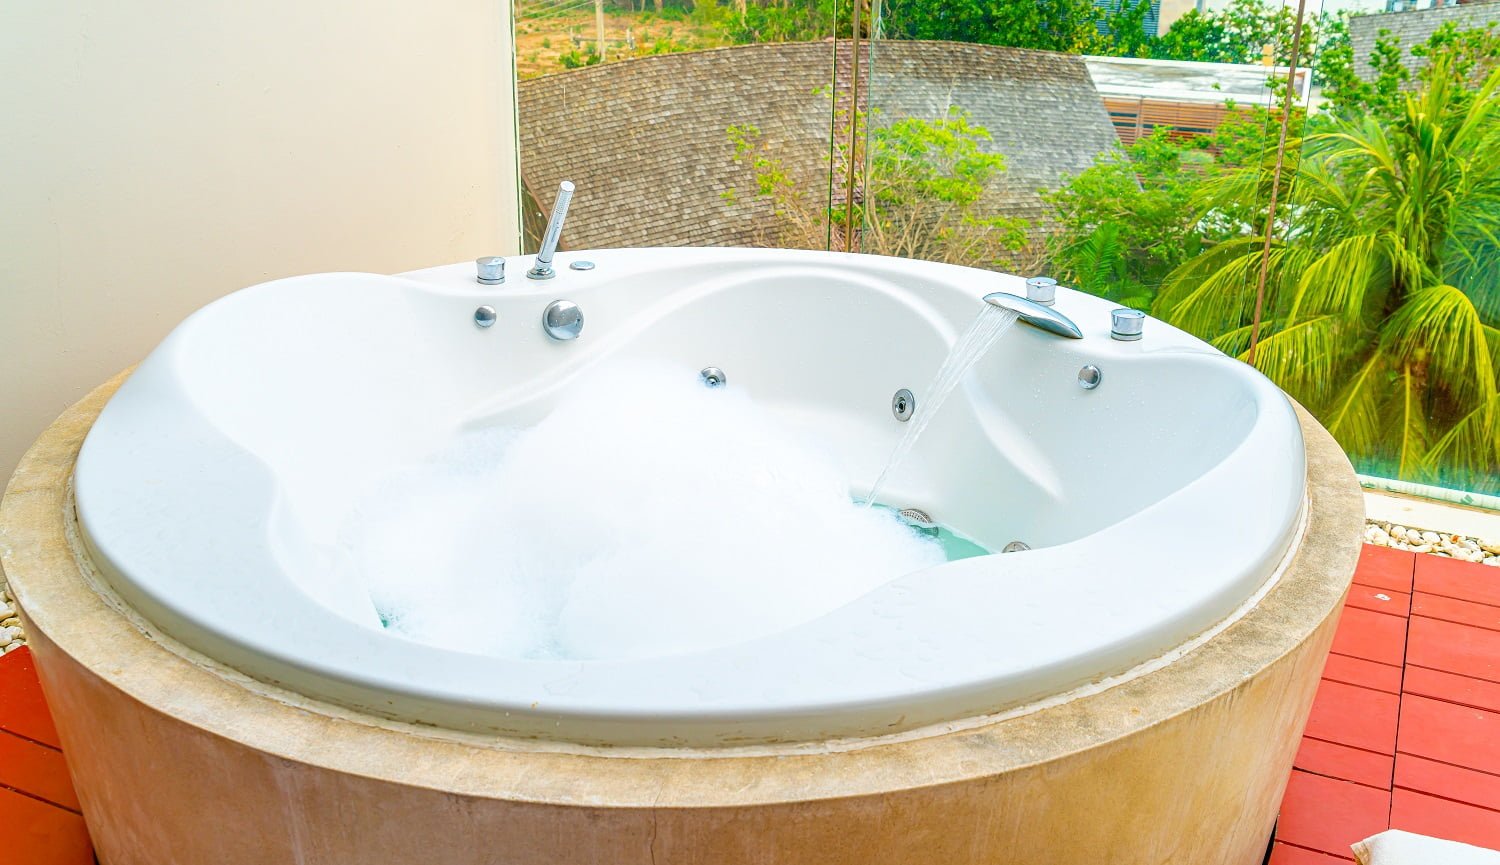 Jacuzz Best Places To Buy A Hot Tub decoration on balcony. Best Places To Buy A Hot Tub Verdict